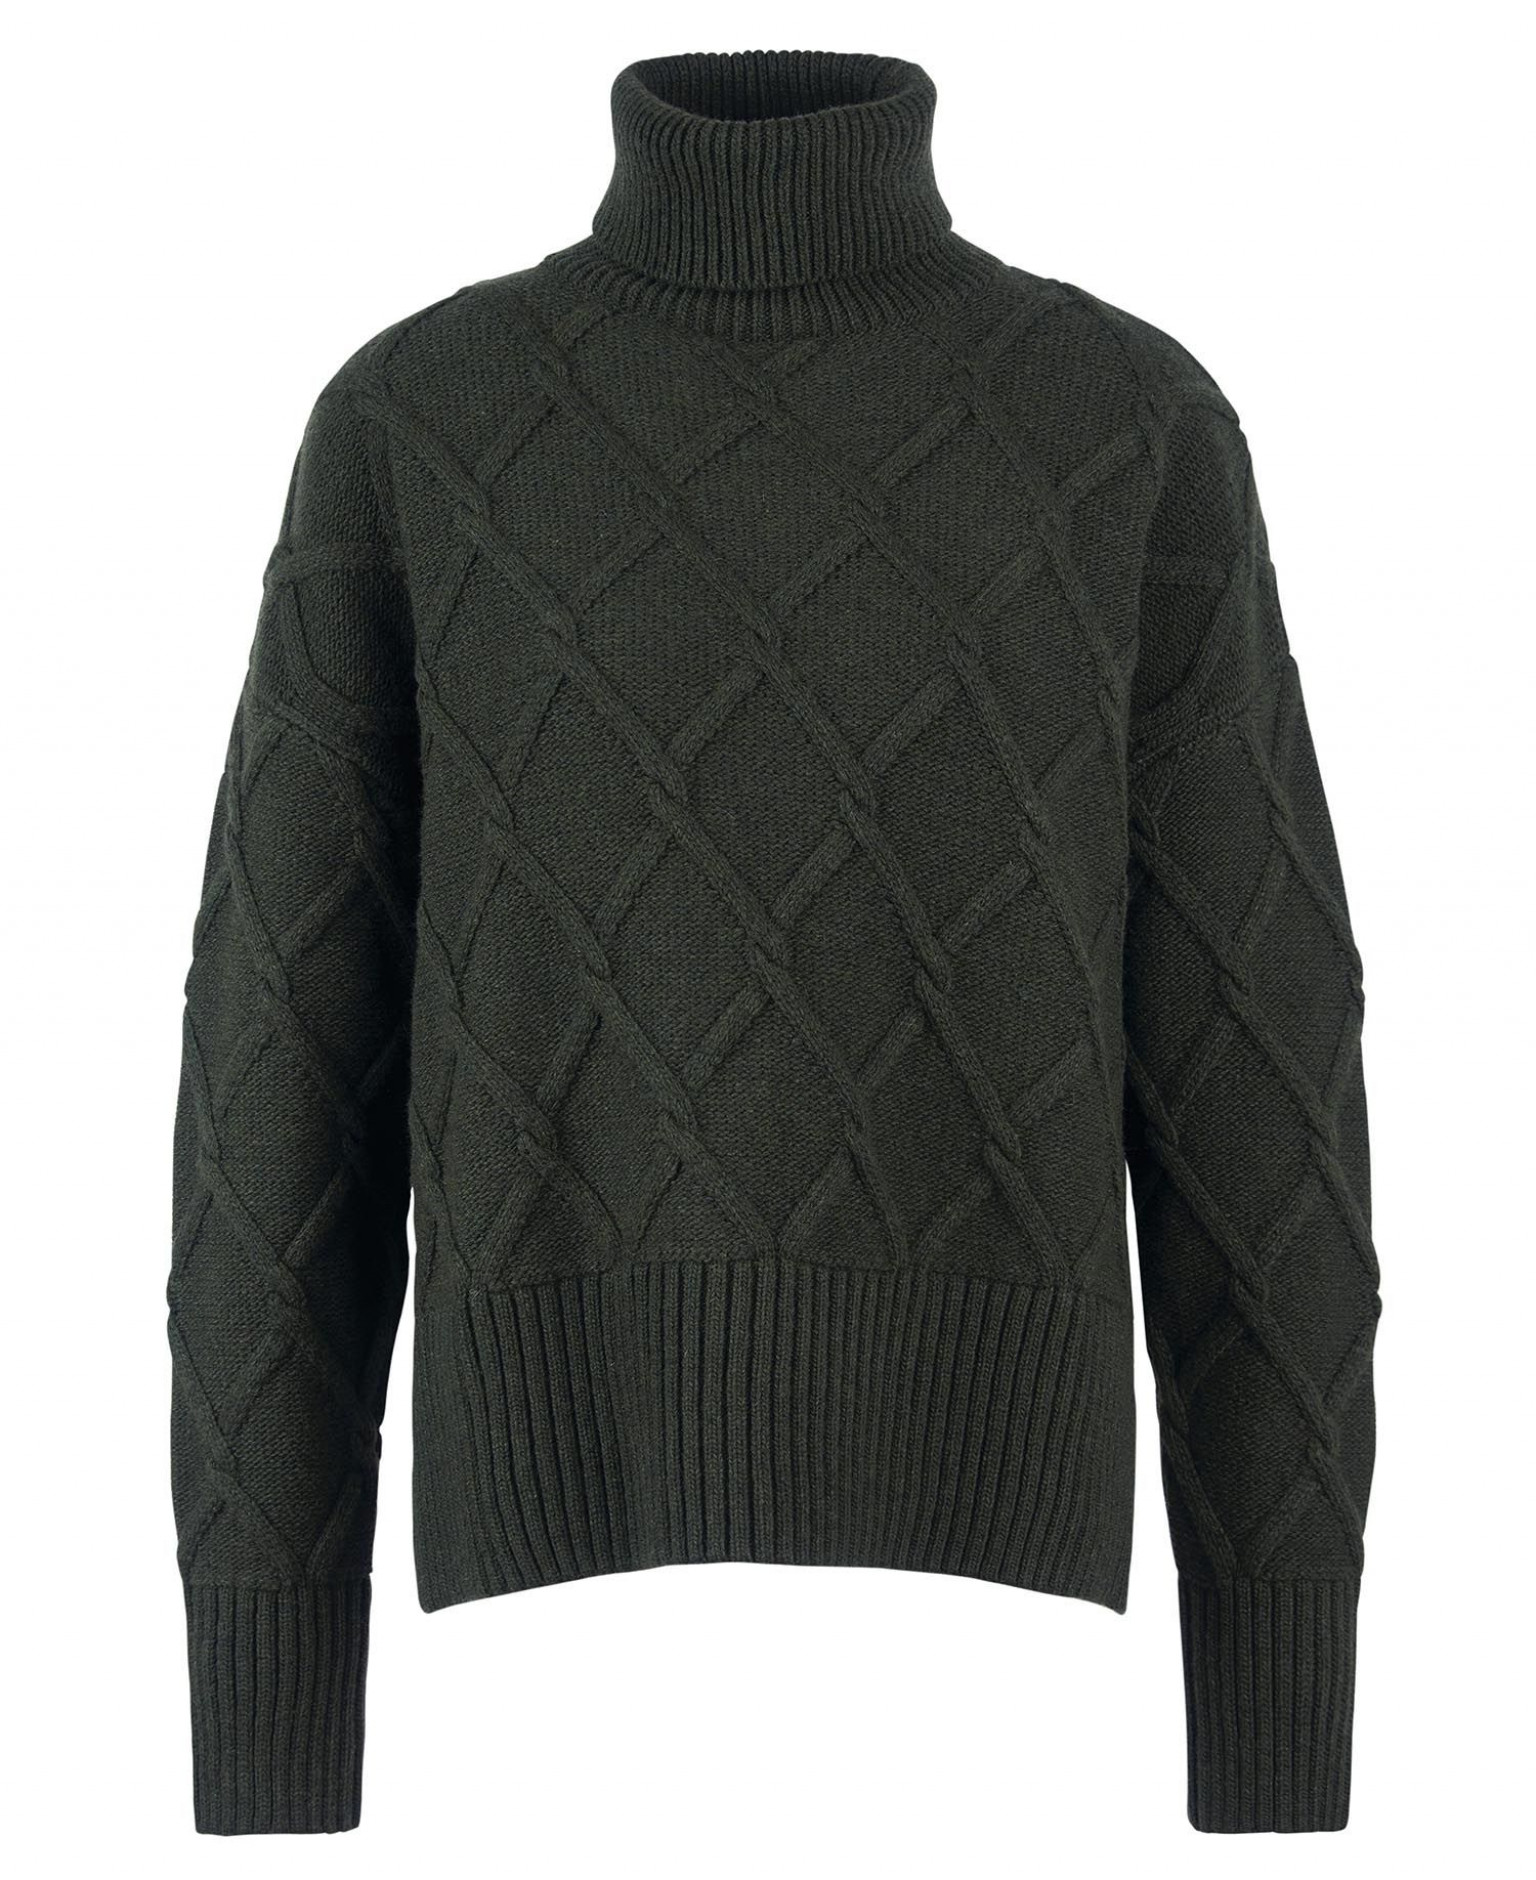 Barbour Perch Knit Olive